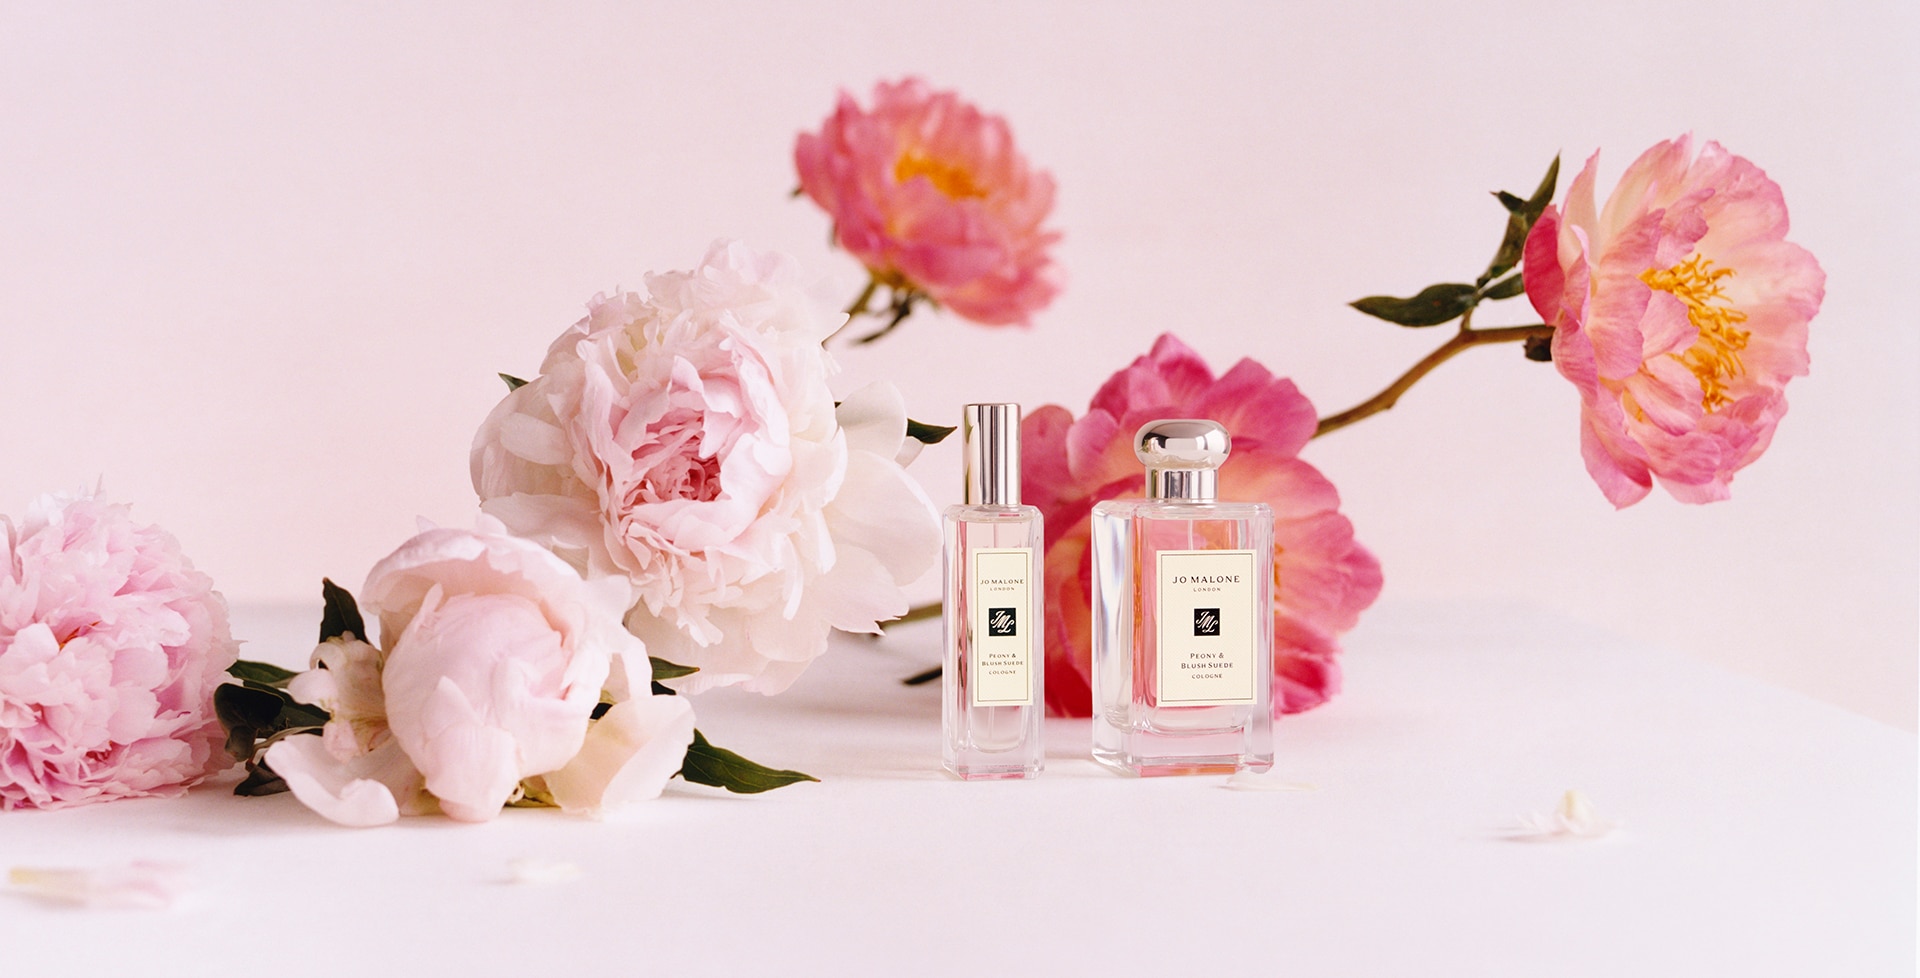 Jo Malone London Peony & Blush Suede Cologne 30ml and 100ml with peony flowers